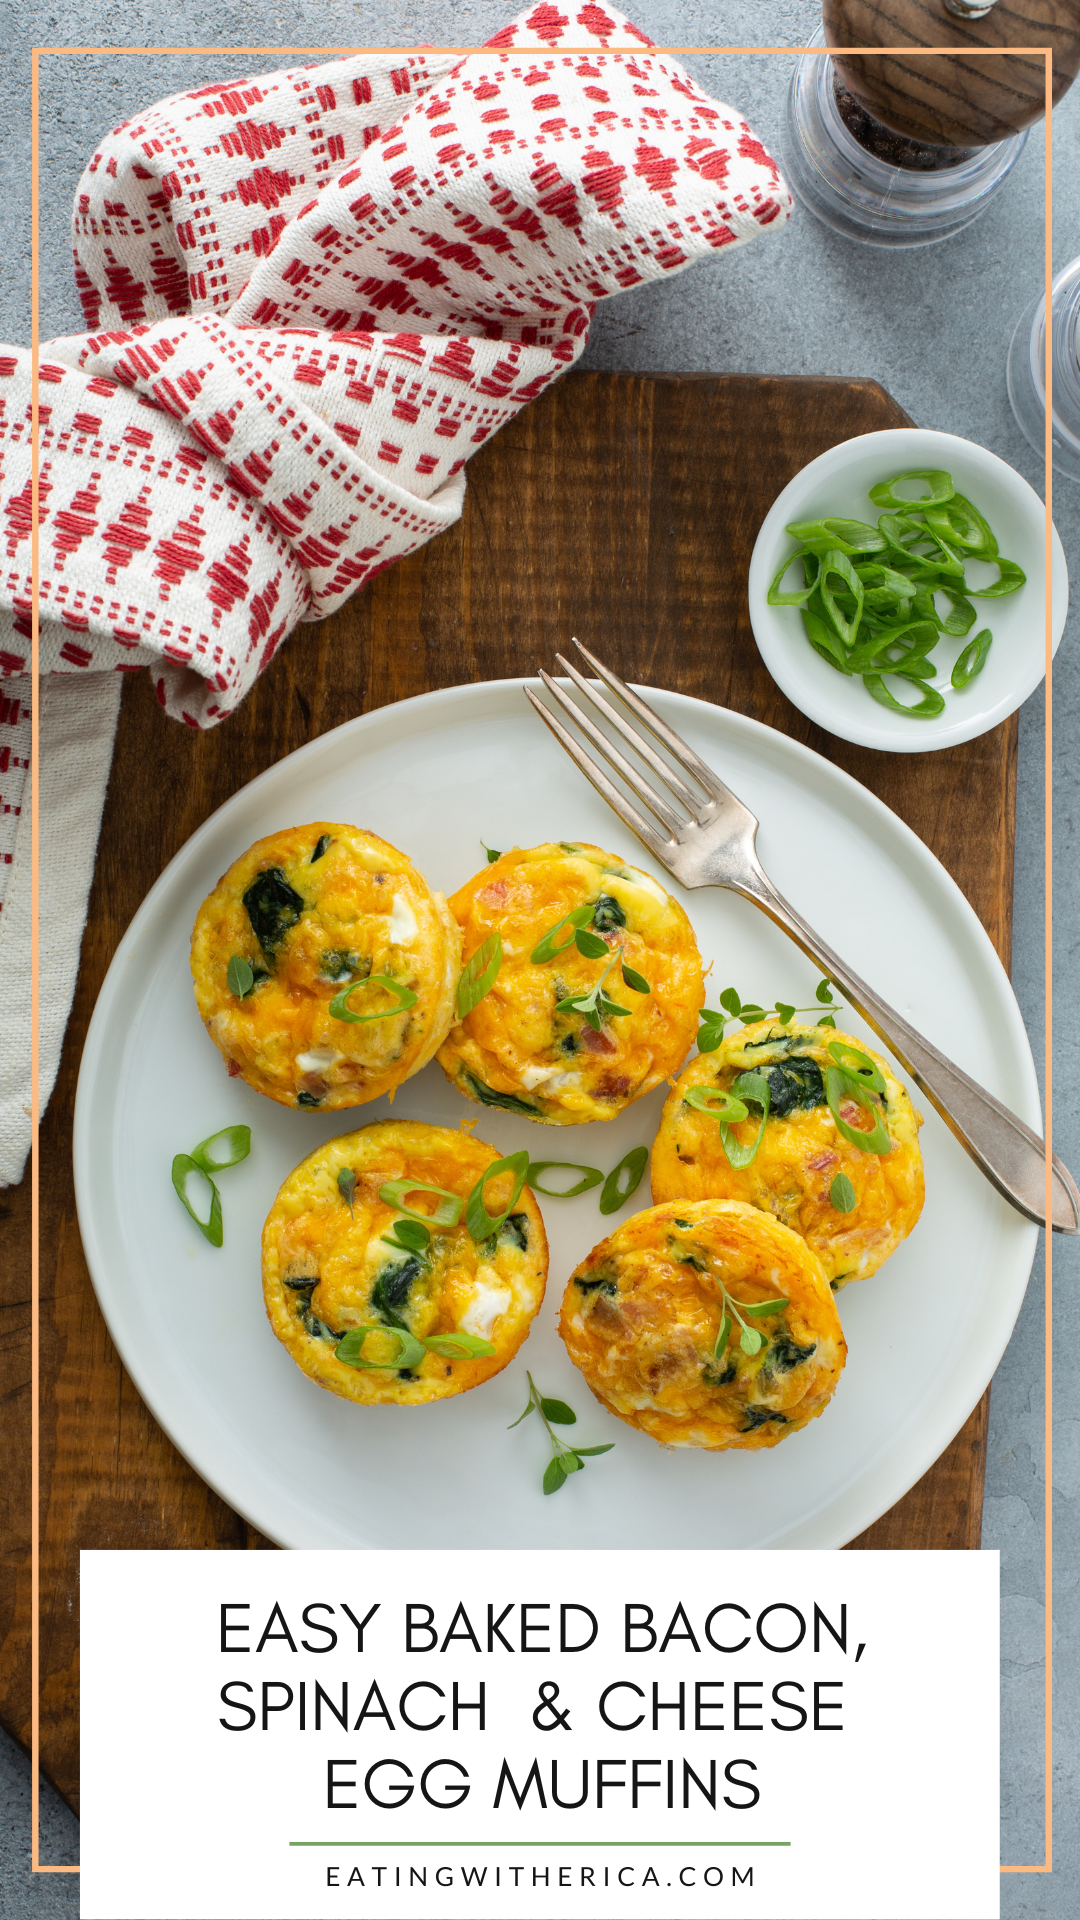 These Easy Baked, Bacon, Spinach and Cheese Egg Muffins are the perfect breakfast meal for on the go. They are delicious, healthy and you can make them multiple ways- CLICK HERE to see how! 